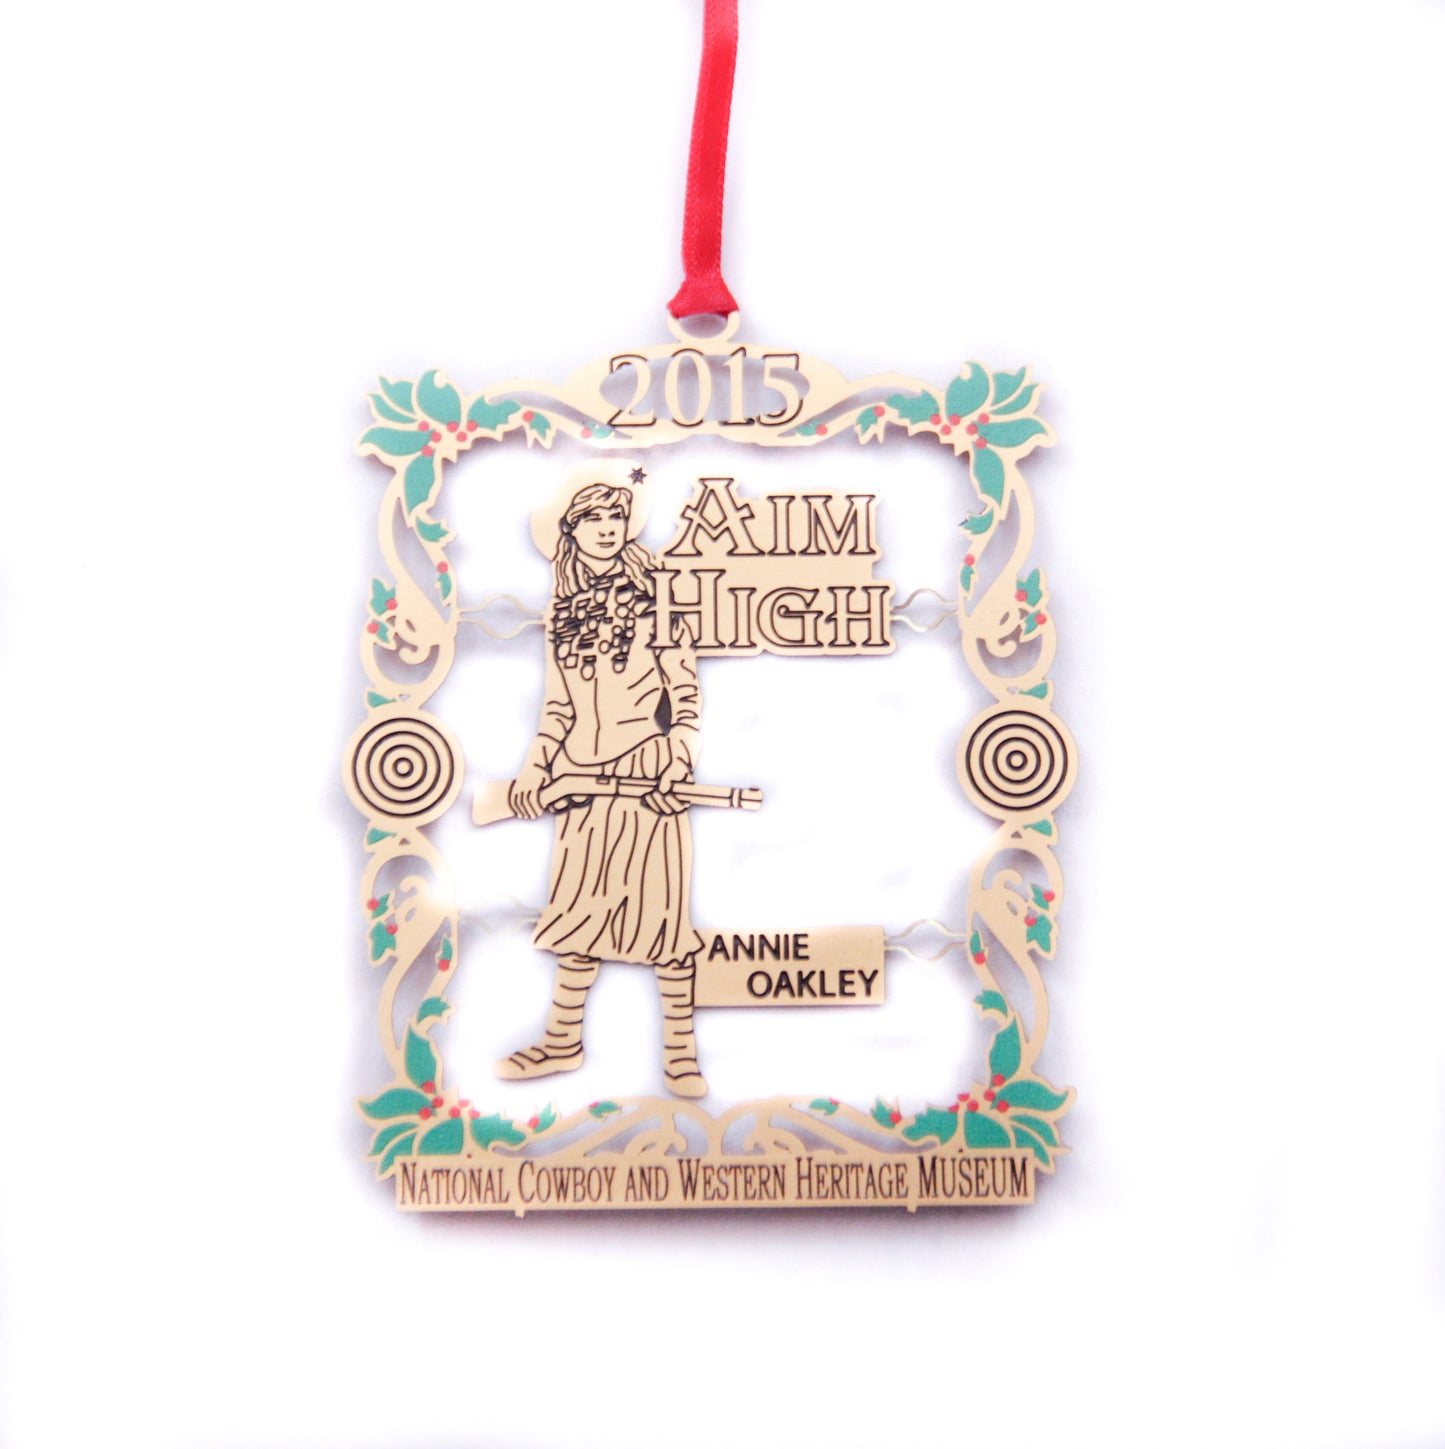 Annie Oakley Aim High christmas ornament gold metal cutout sharp shooter national cowboy and western heritage museum store holiday ornament for 2015 collection collectible